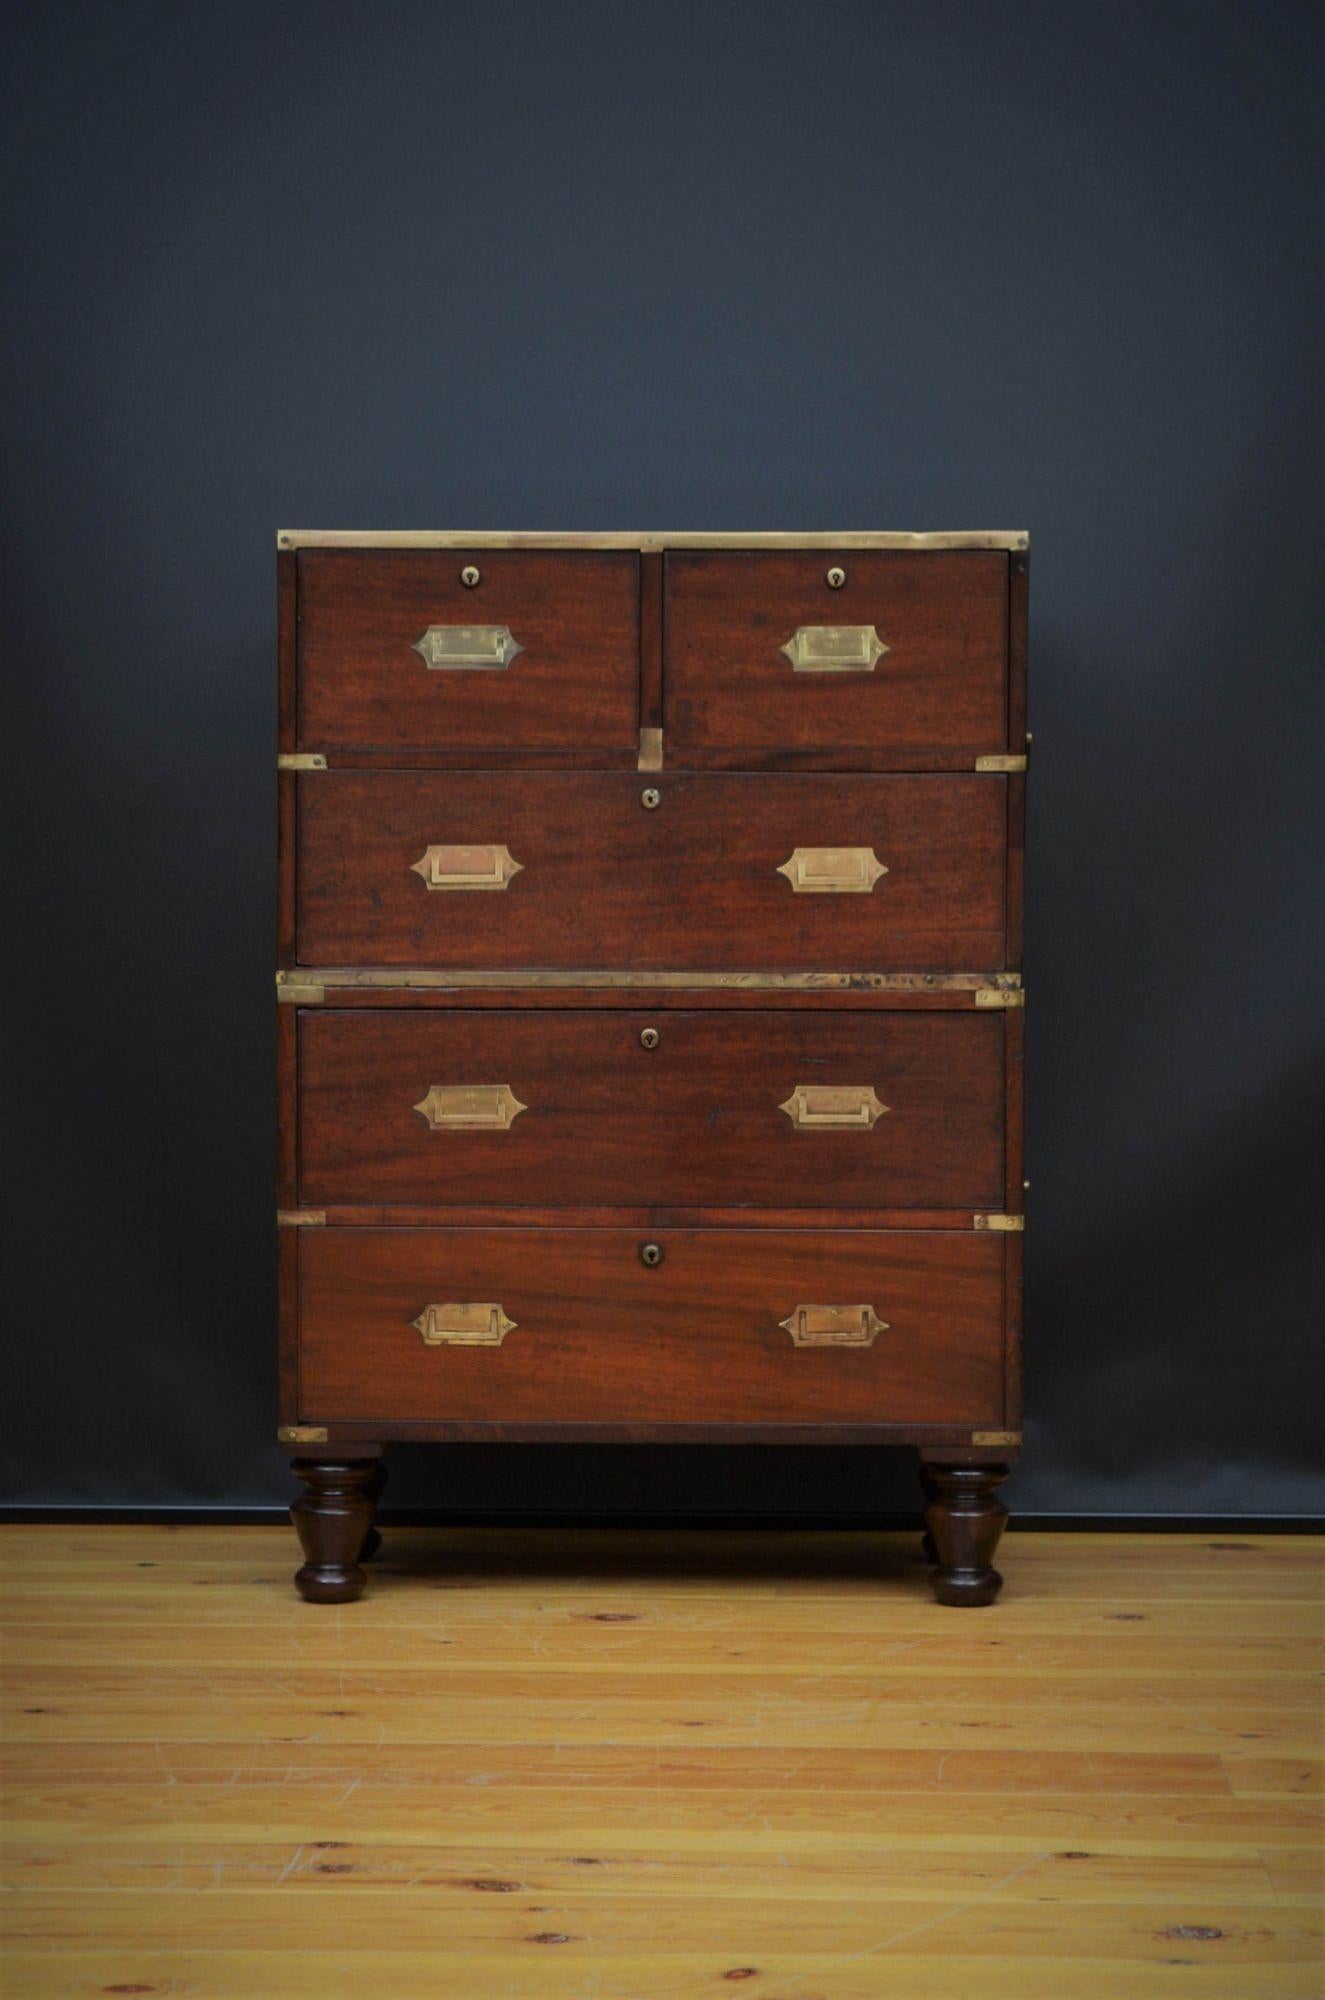 Sn5379 Early 19th century military chest of drawers with two short and three long oak lined drawers, (one short drawer with a working key), all fitted with brass bunds to edges and corners and original carrying handles to sides, all standing on